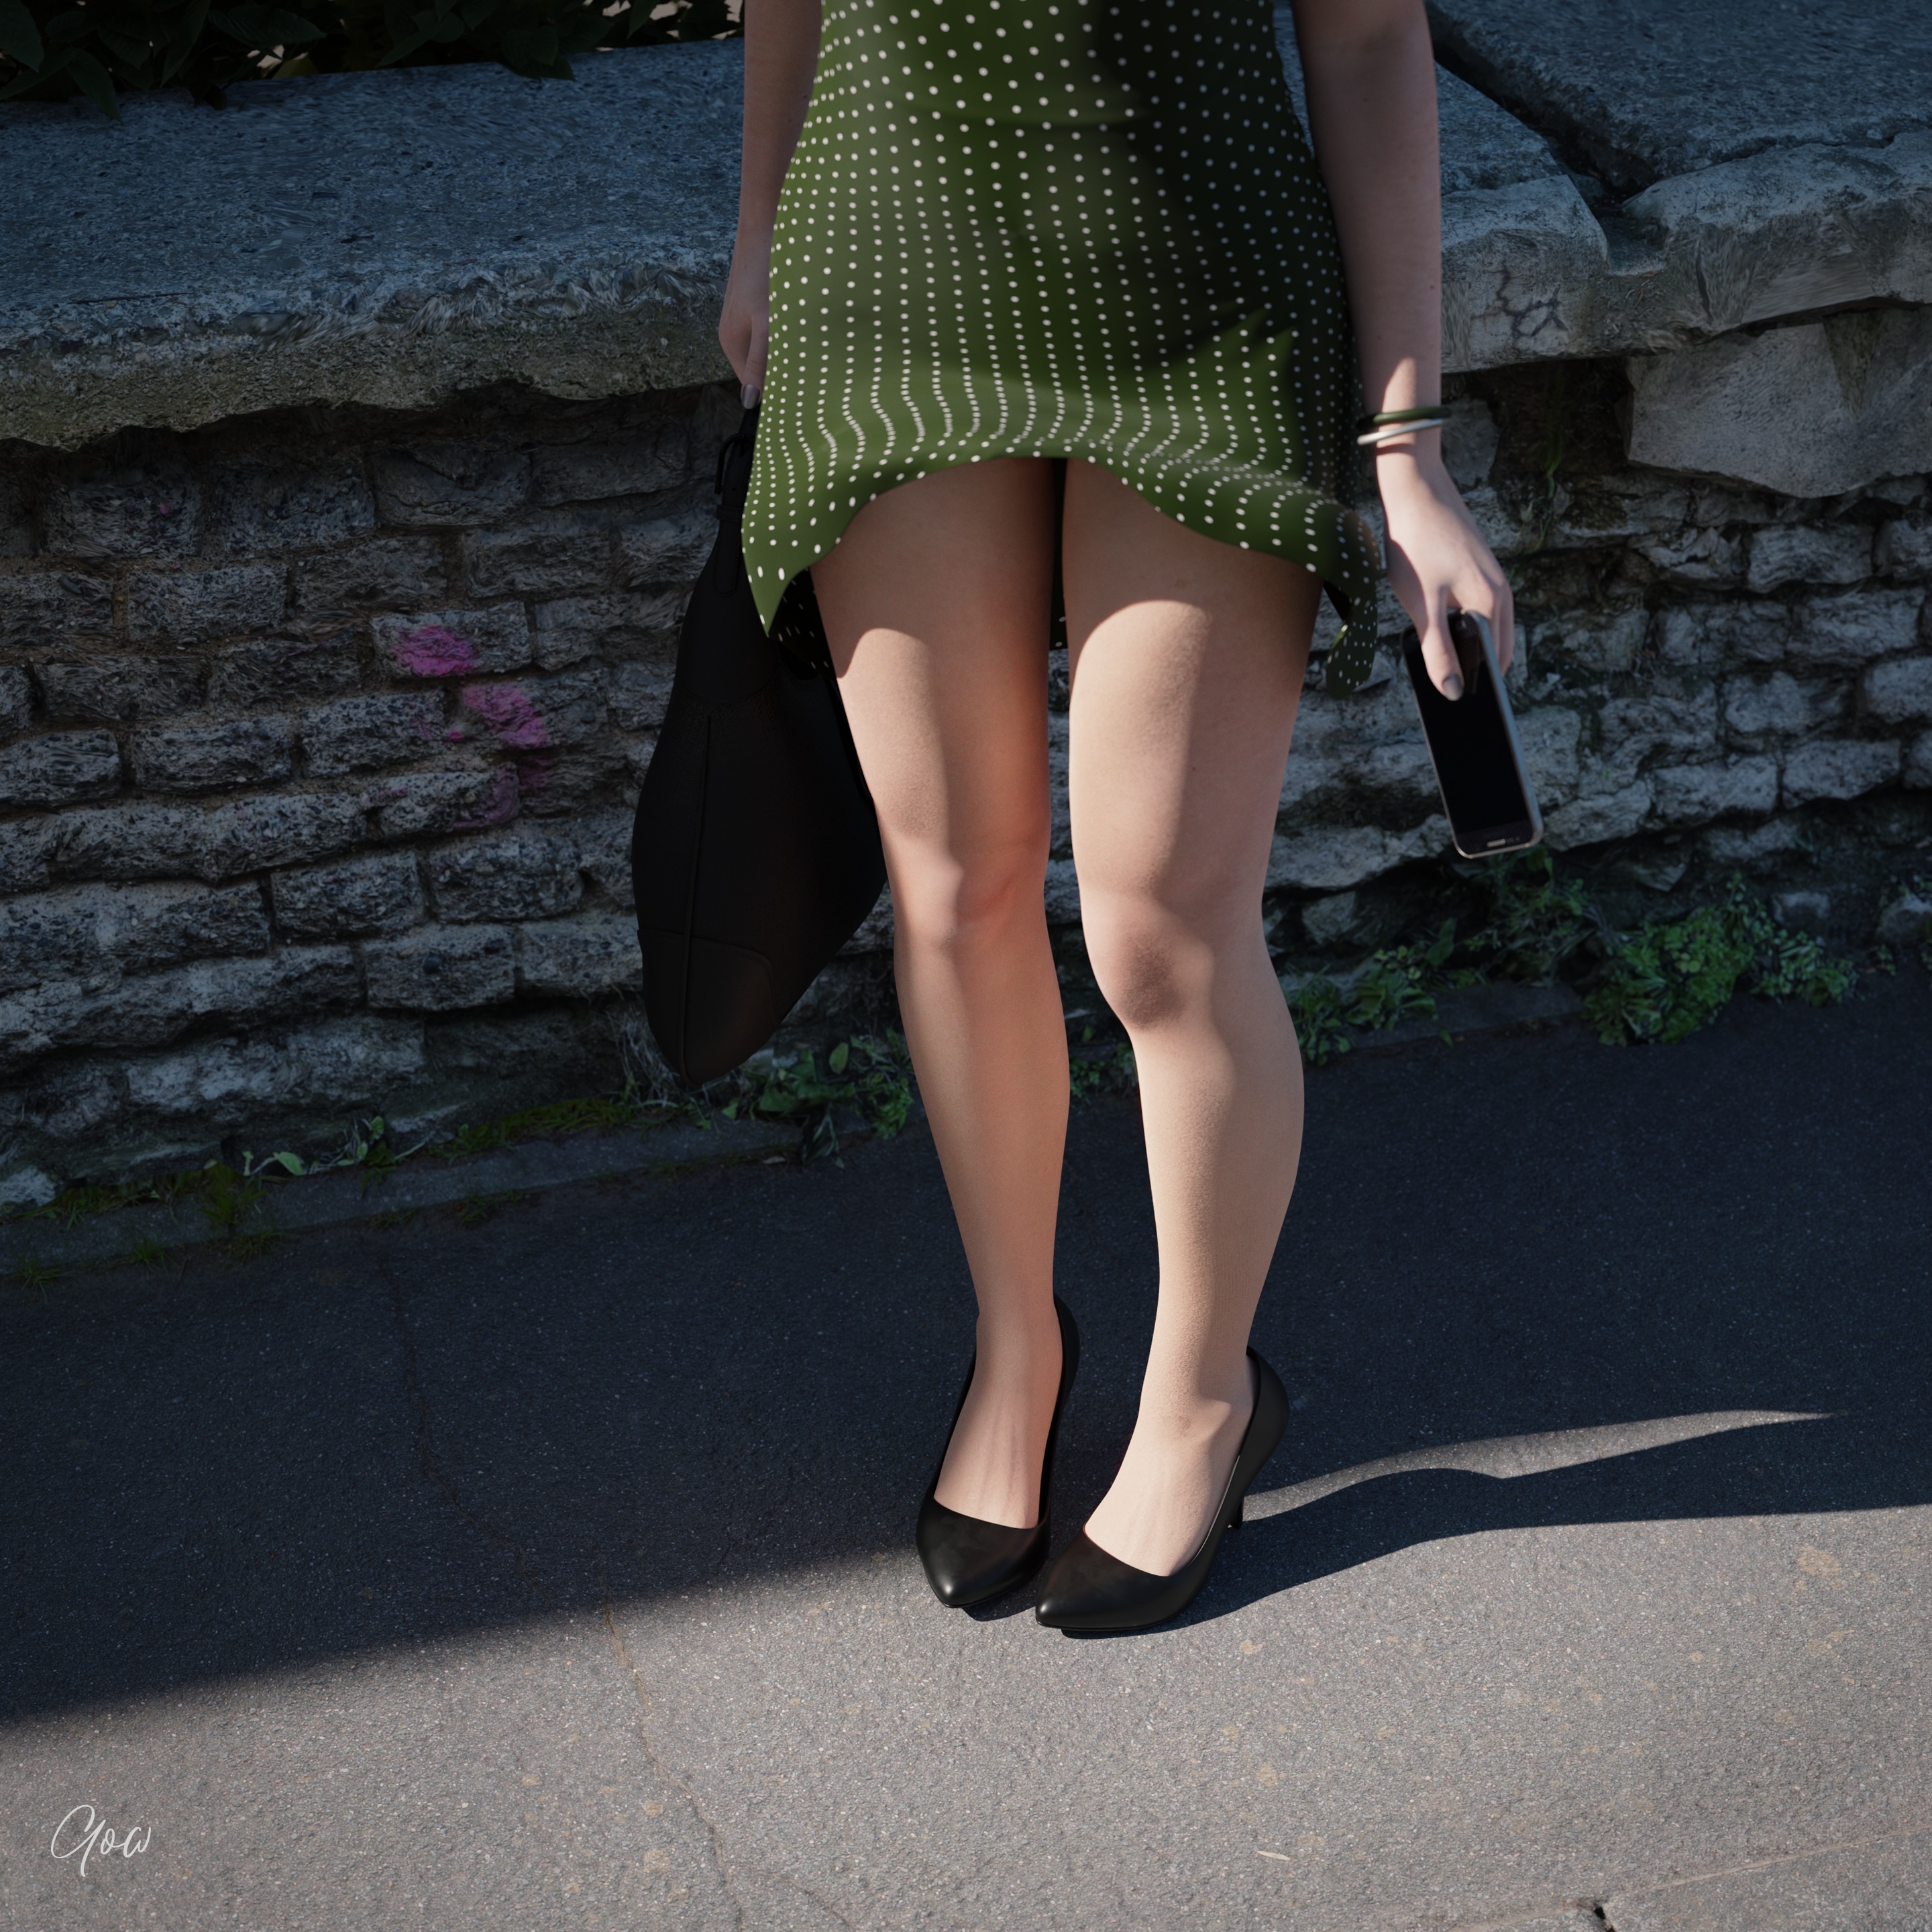 Dotted green and the wind - PT1 White Outdoor Lady Secretary Photoshoot Clothed Skirt Upskirt Pussy Wet Pussy Legs Sexy Sexyhot Photorealistic No Panties High Heels Hairy Pussy Party Dress Milf Natural Boobs Natural Tits 8